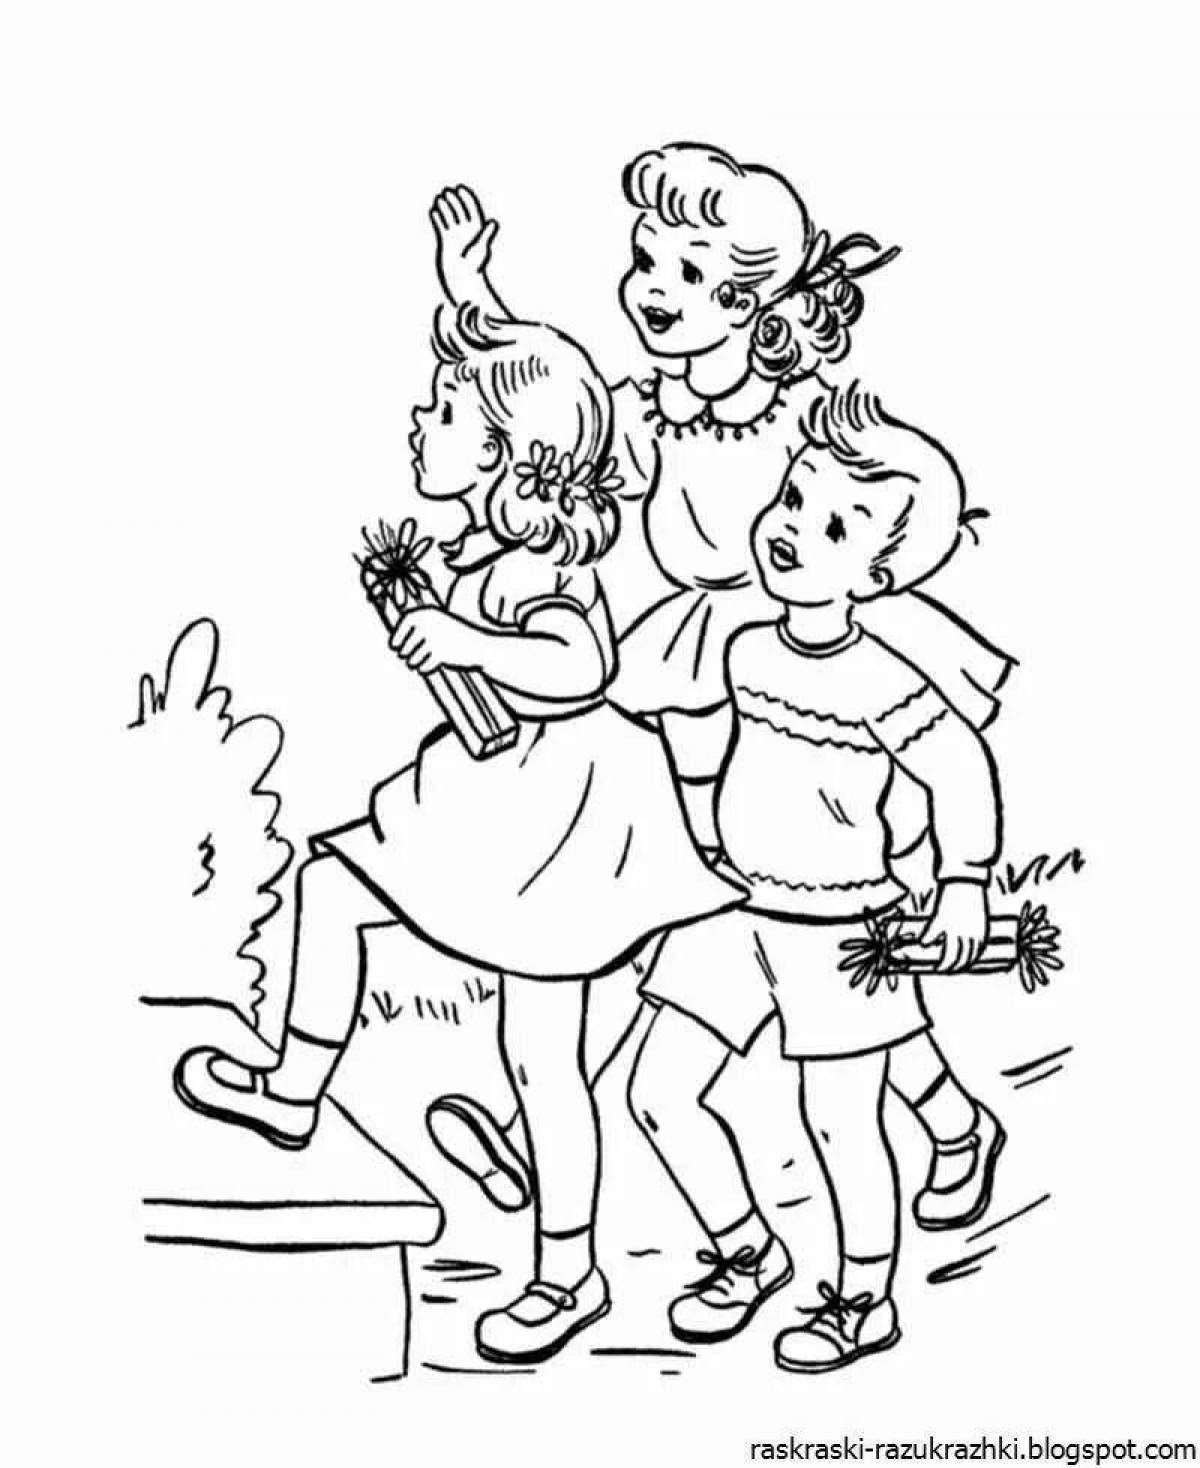 Color-frenzy me and my friends coloring page